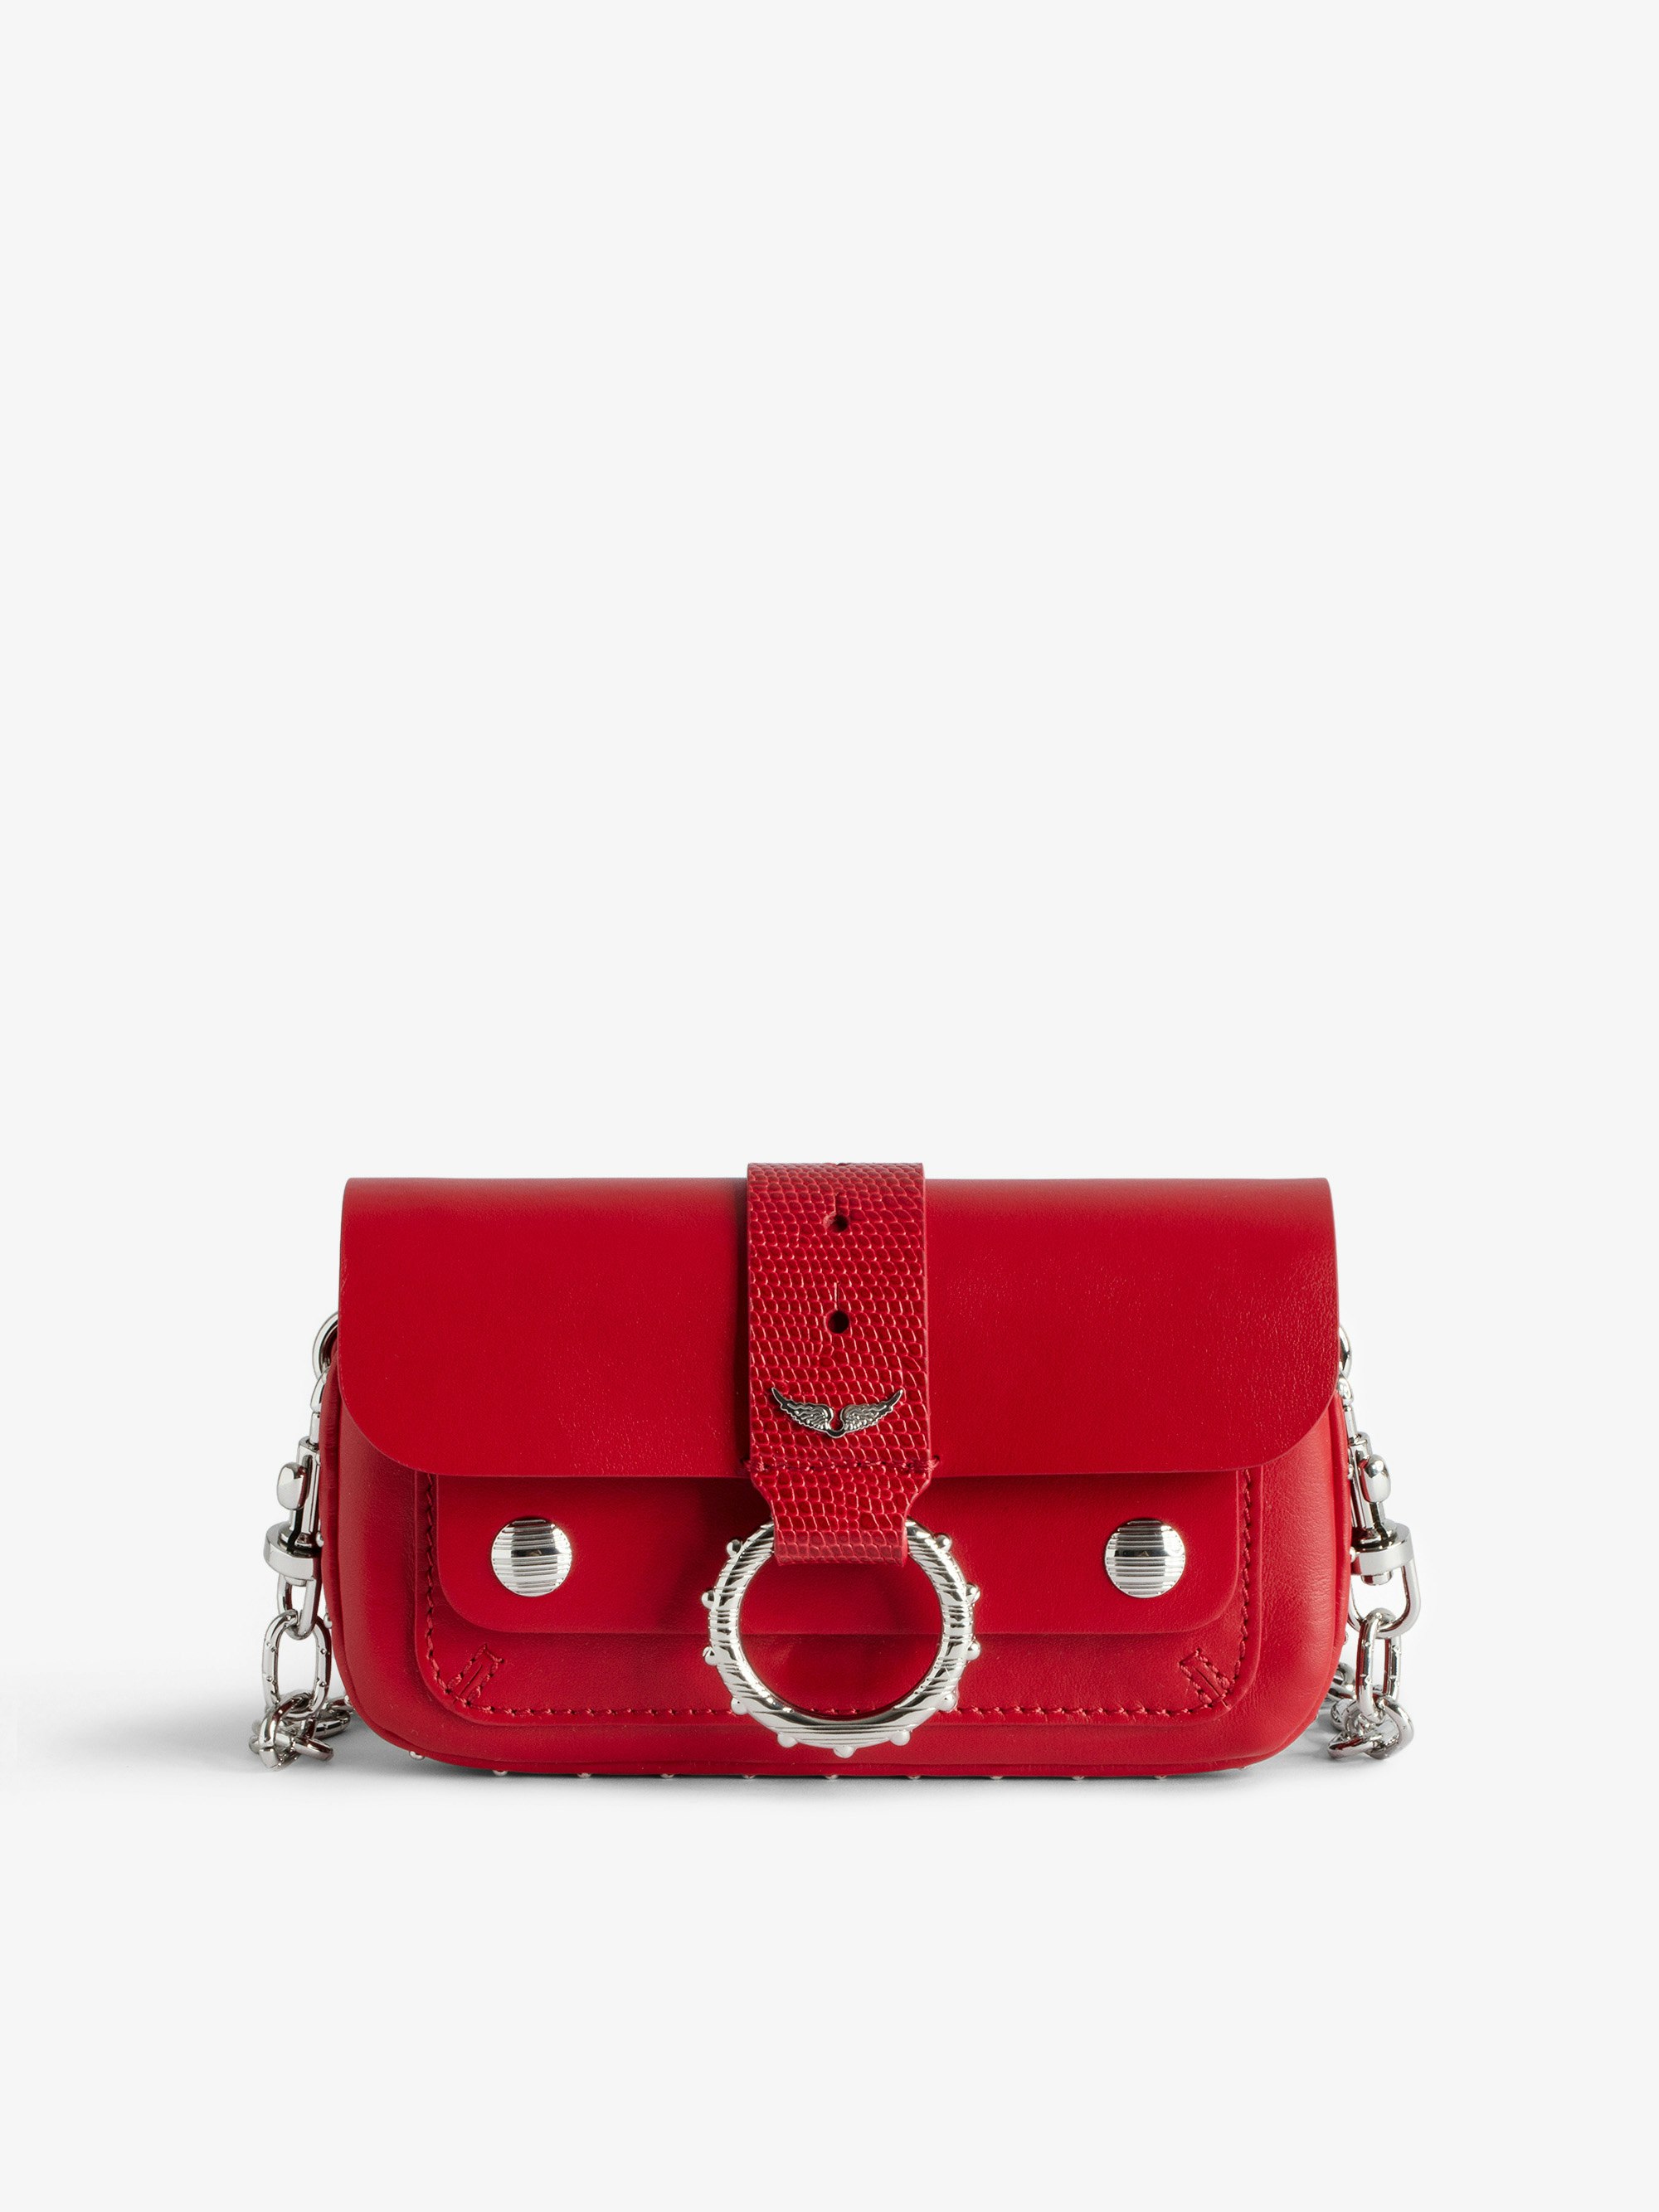 Kate Wallet Bag - Designed by Kate Moss for Zadig&Voltaire.  Women’s red smooth leather mini bag with metal chain and iguana-embossed leather loop.